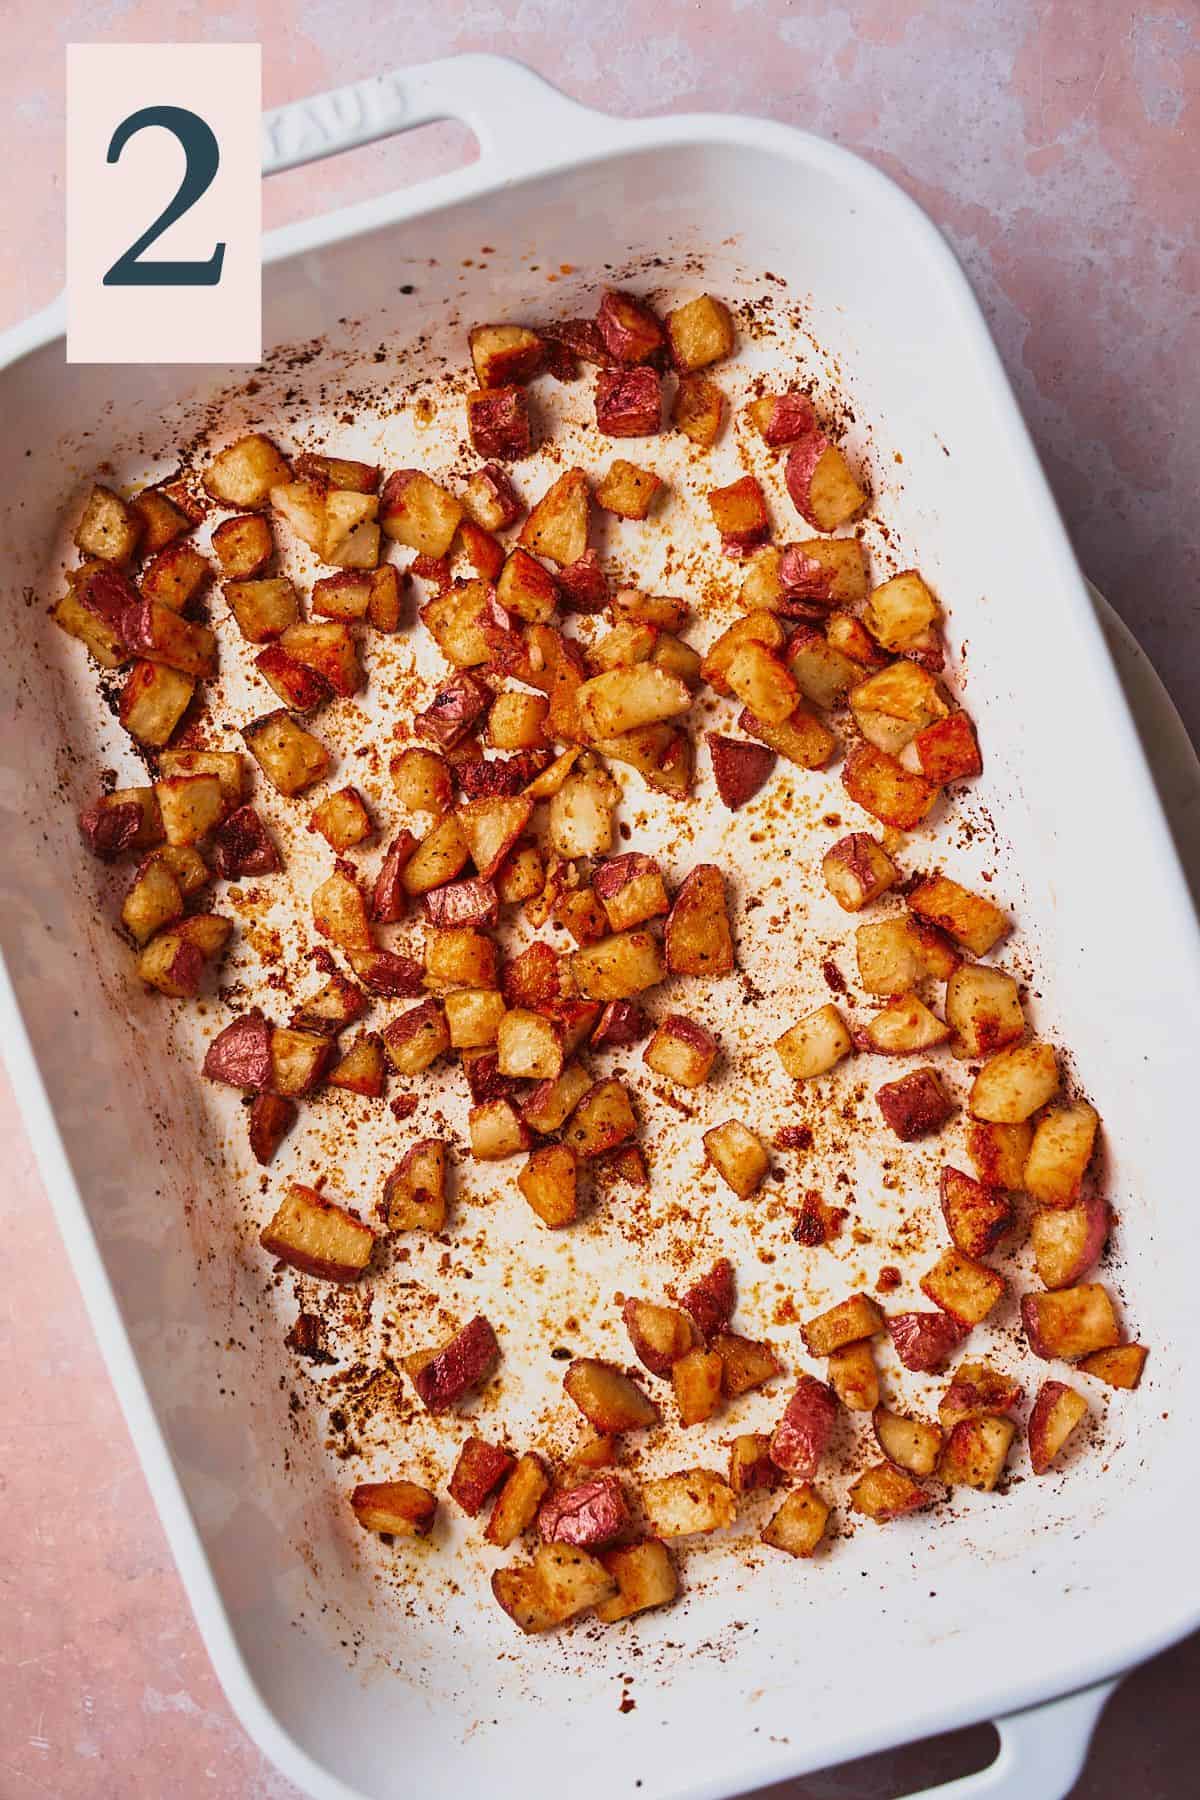 Crispy and golden brown potatoes in a white baking dish. 